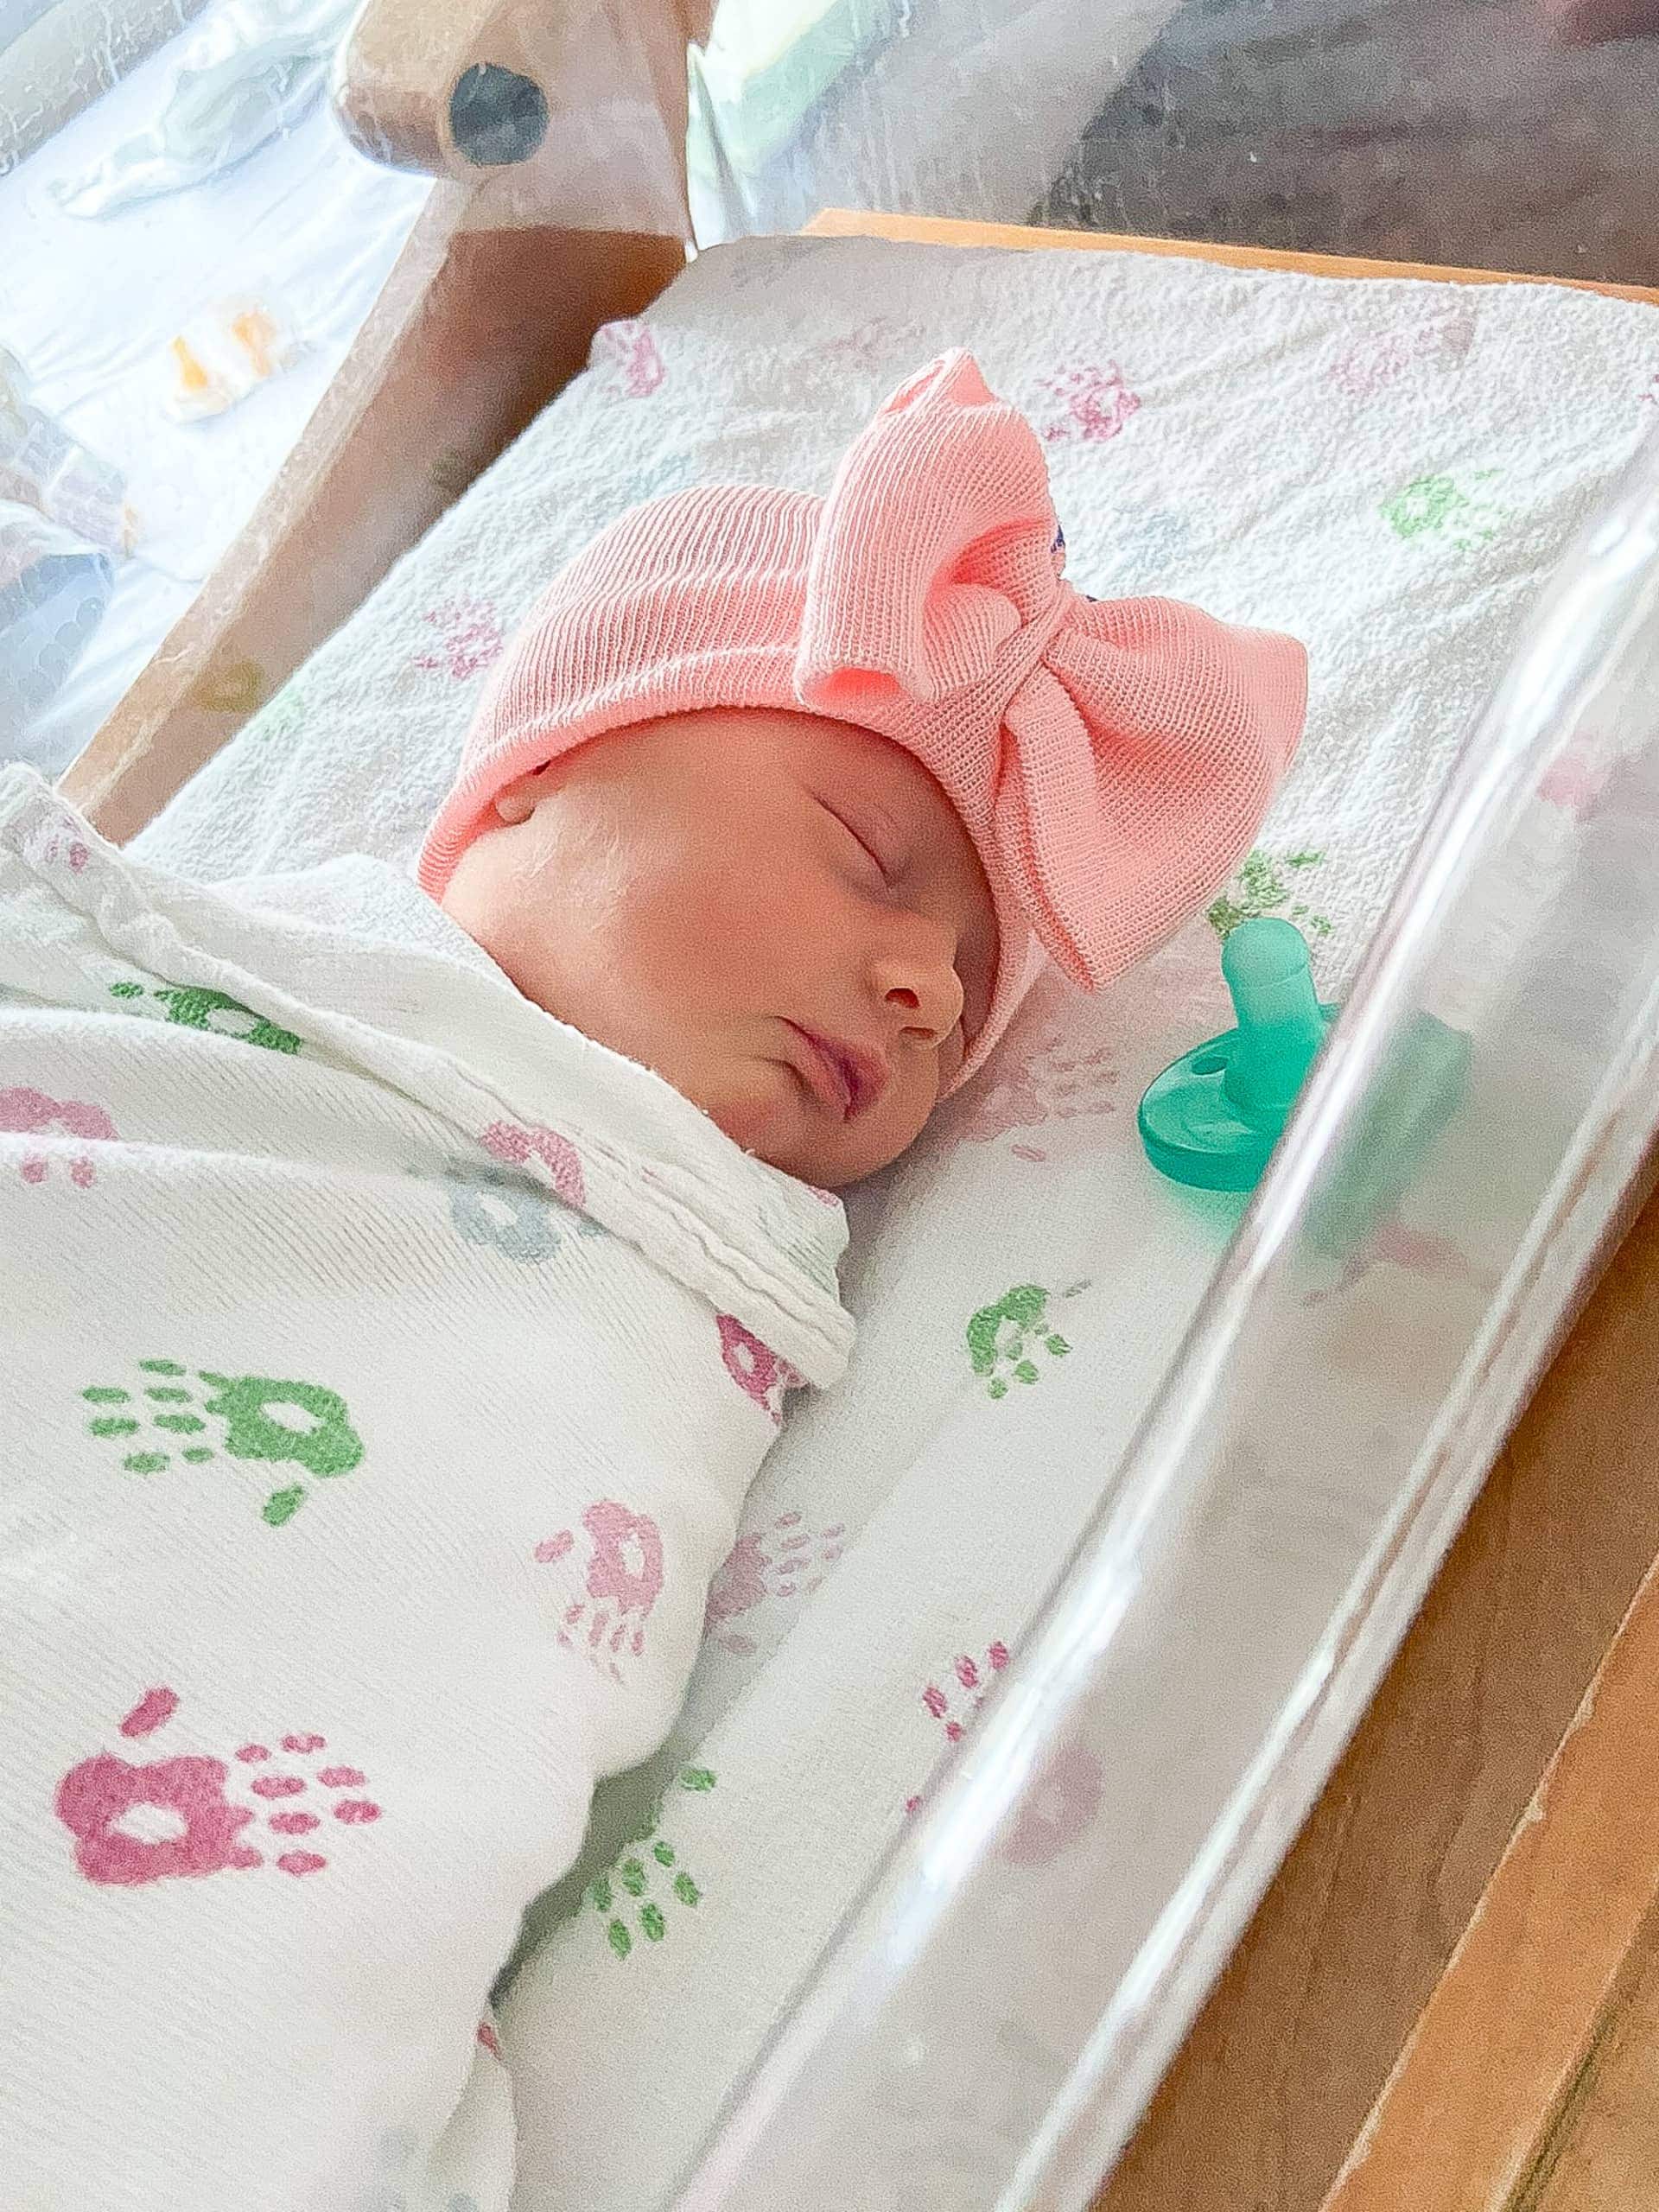 Introducing Aurora and her birth story